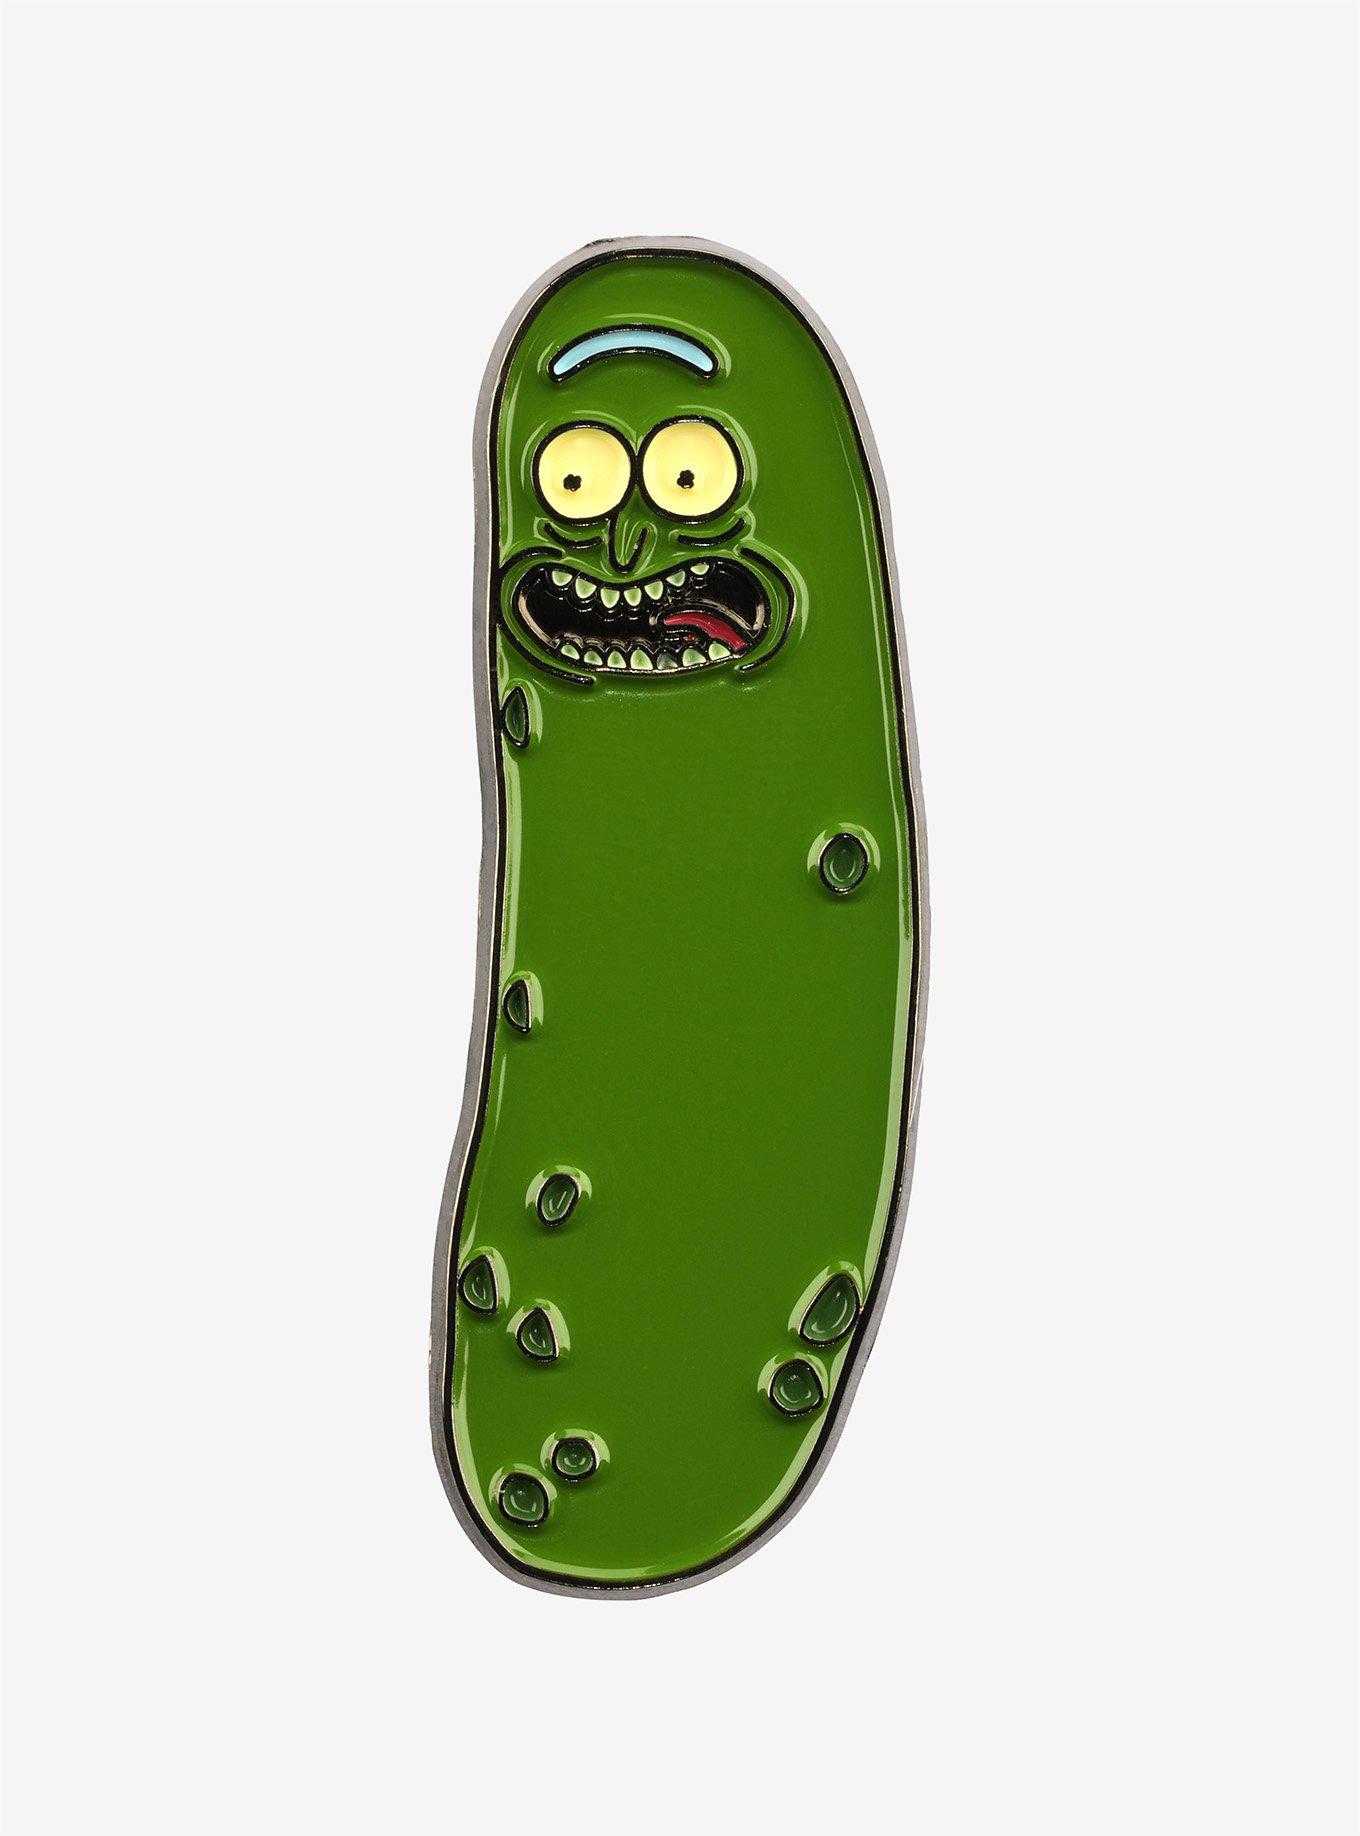 Rick And Morty: Pickle Rick Face, Official Rick And Morty Mobile Covers